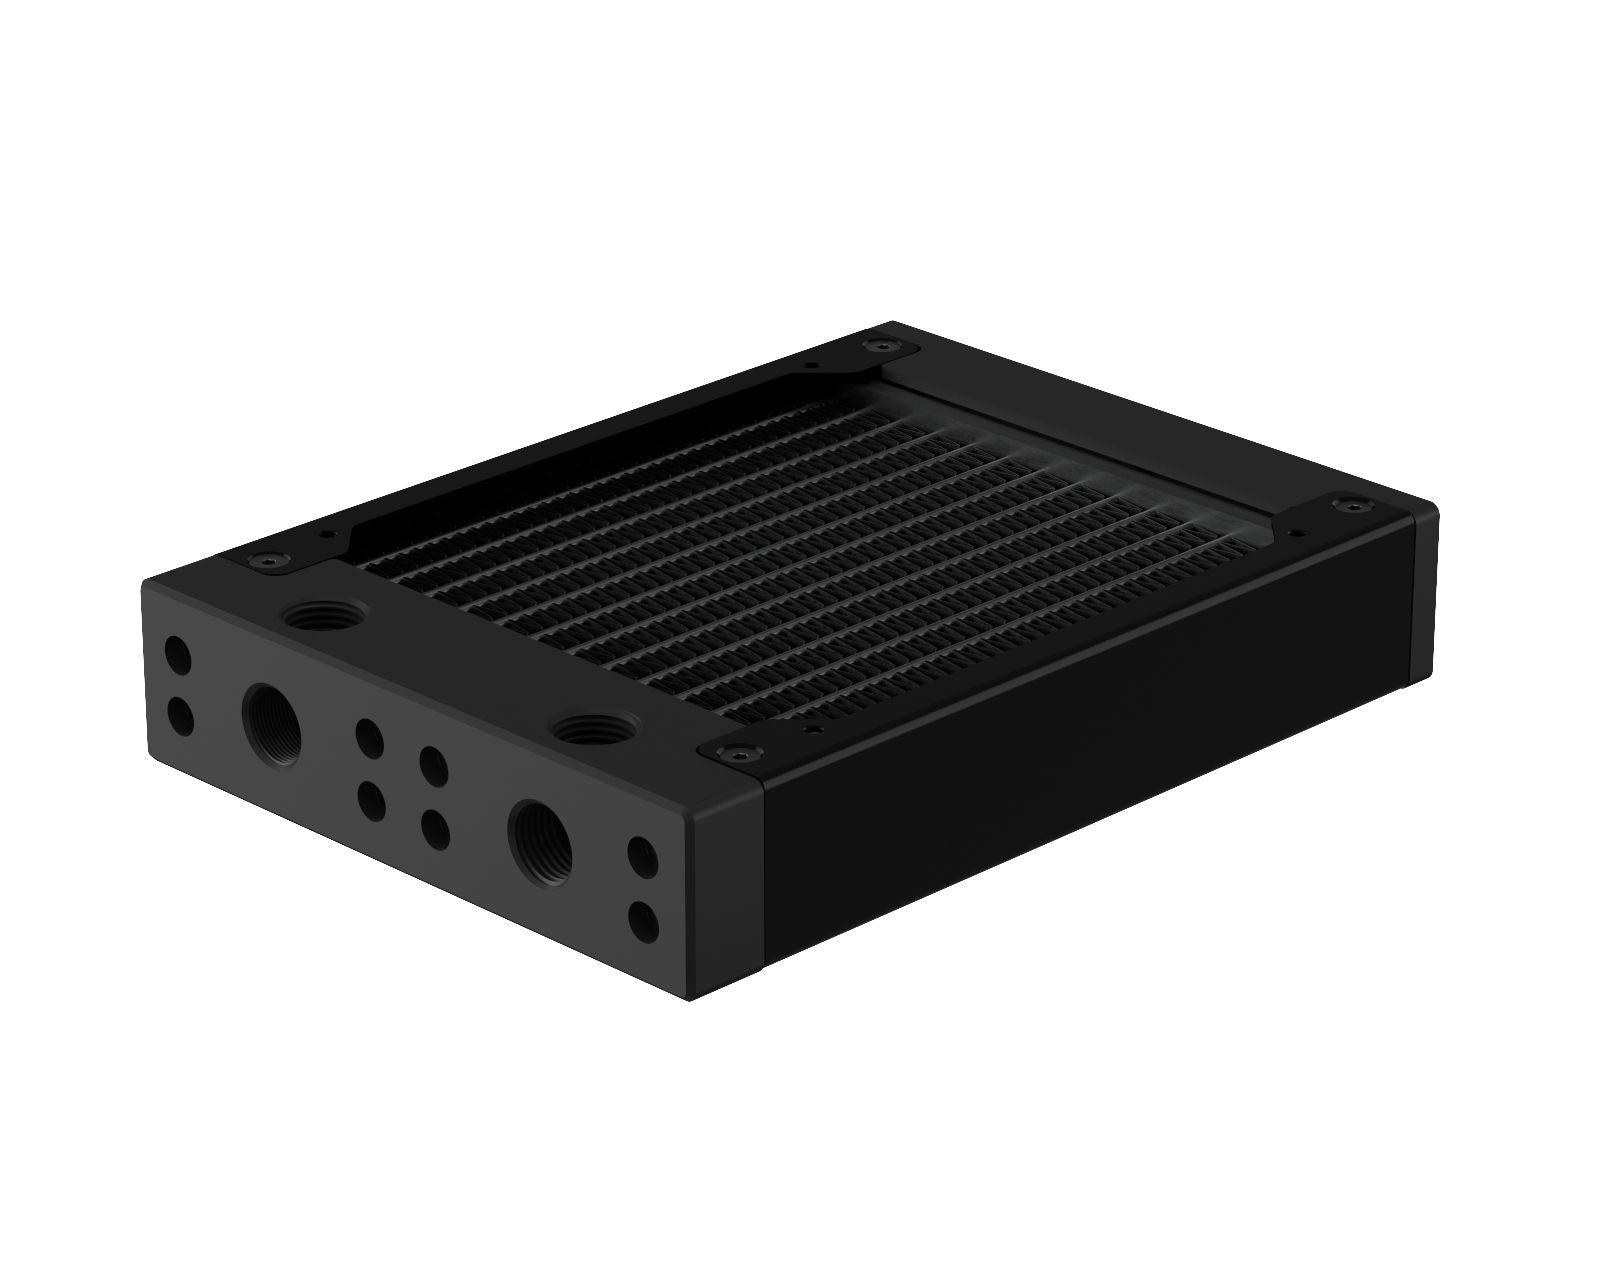 PrimoChill 120SL (30mm) EXIMO Modular Radiator, Black POM, 1x120mm, Single Fan (R-SL-BK12) Available in 20+ Colors, Assembled in USA and Custom Watercooling Loop Ready - Satin Black